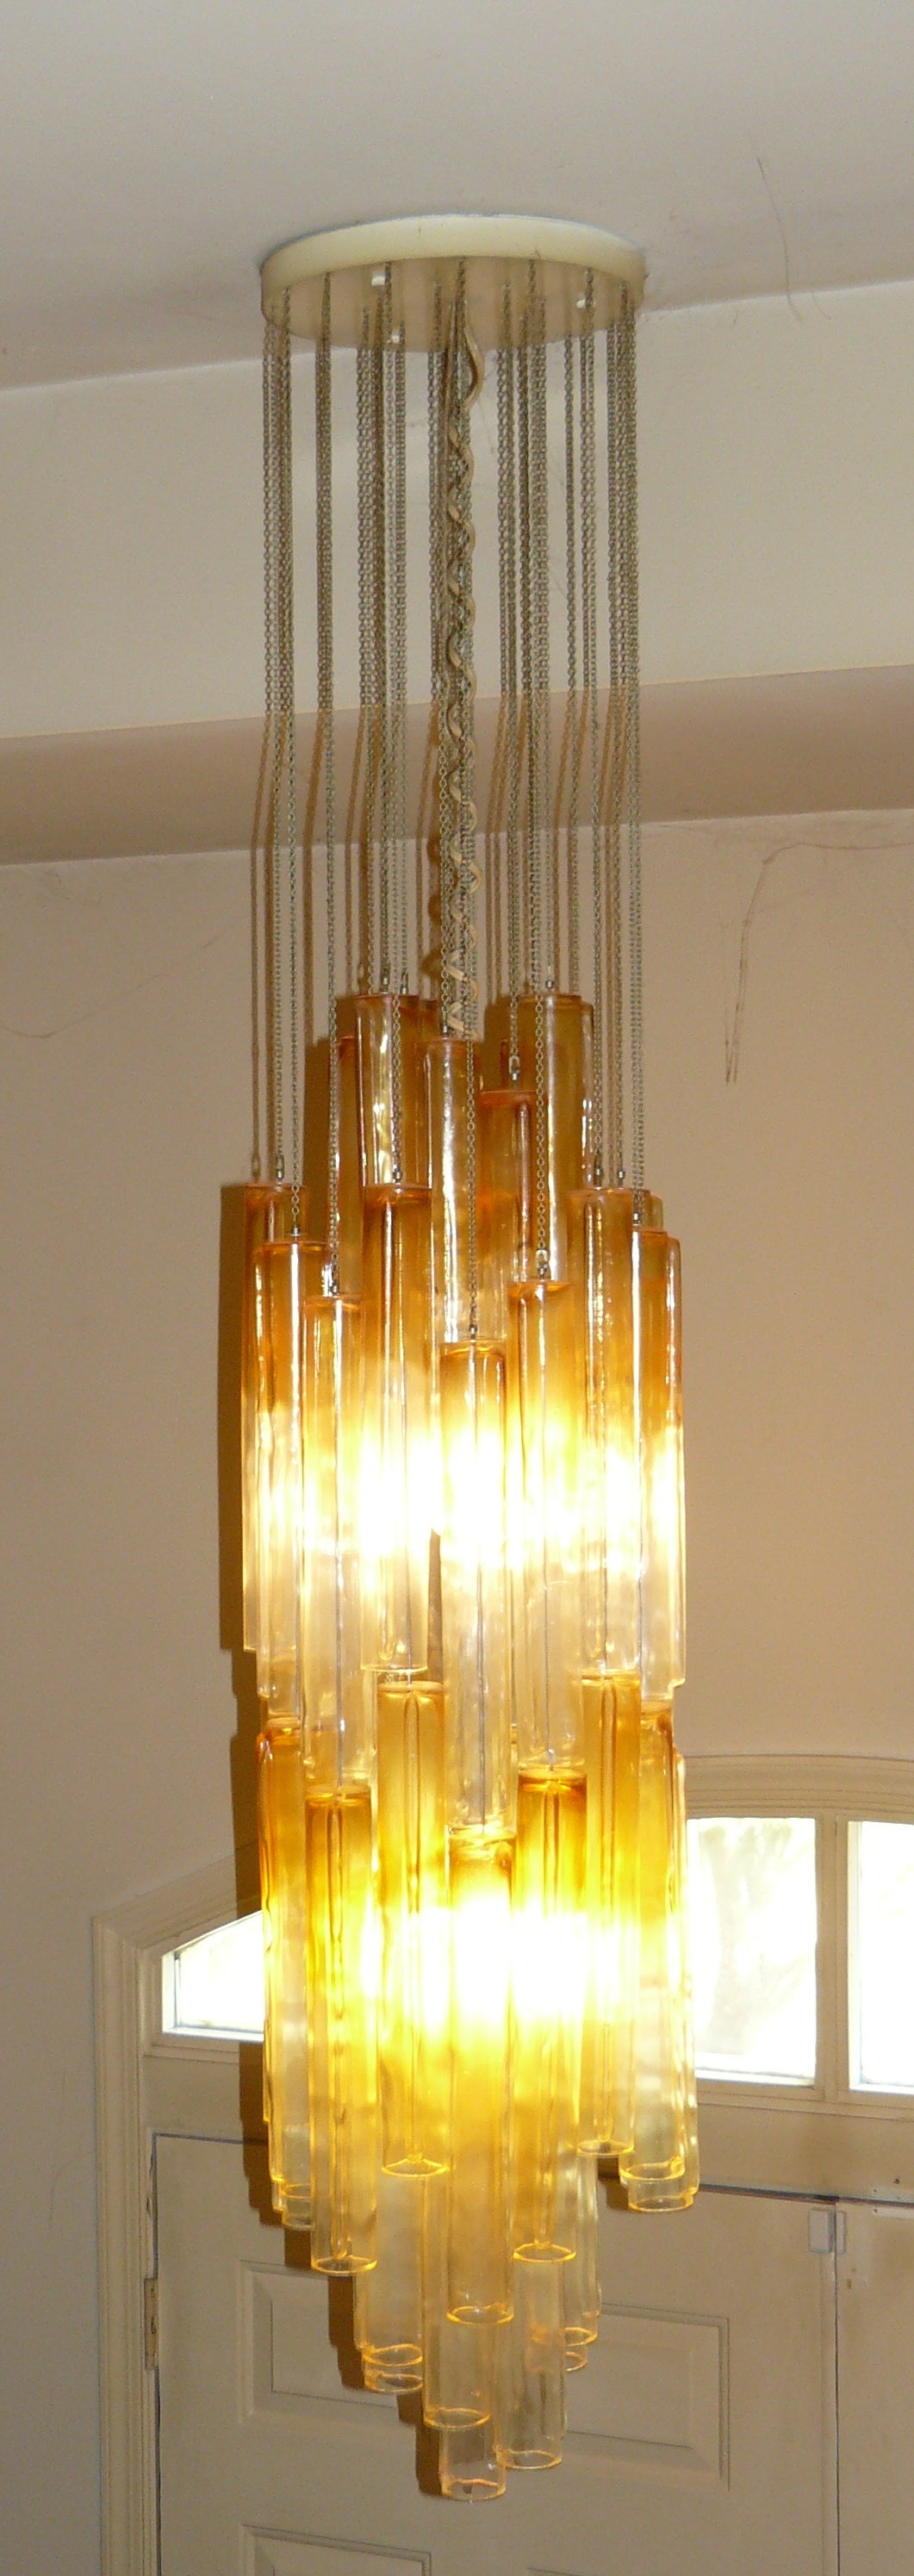 1970s amber and clear glass Mazzega Murano chandelier. Comprised of 49 Murano glass tubes (each 14.5